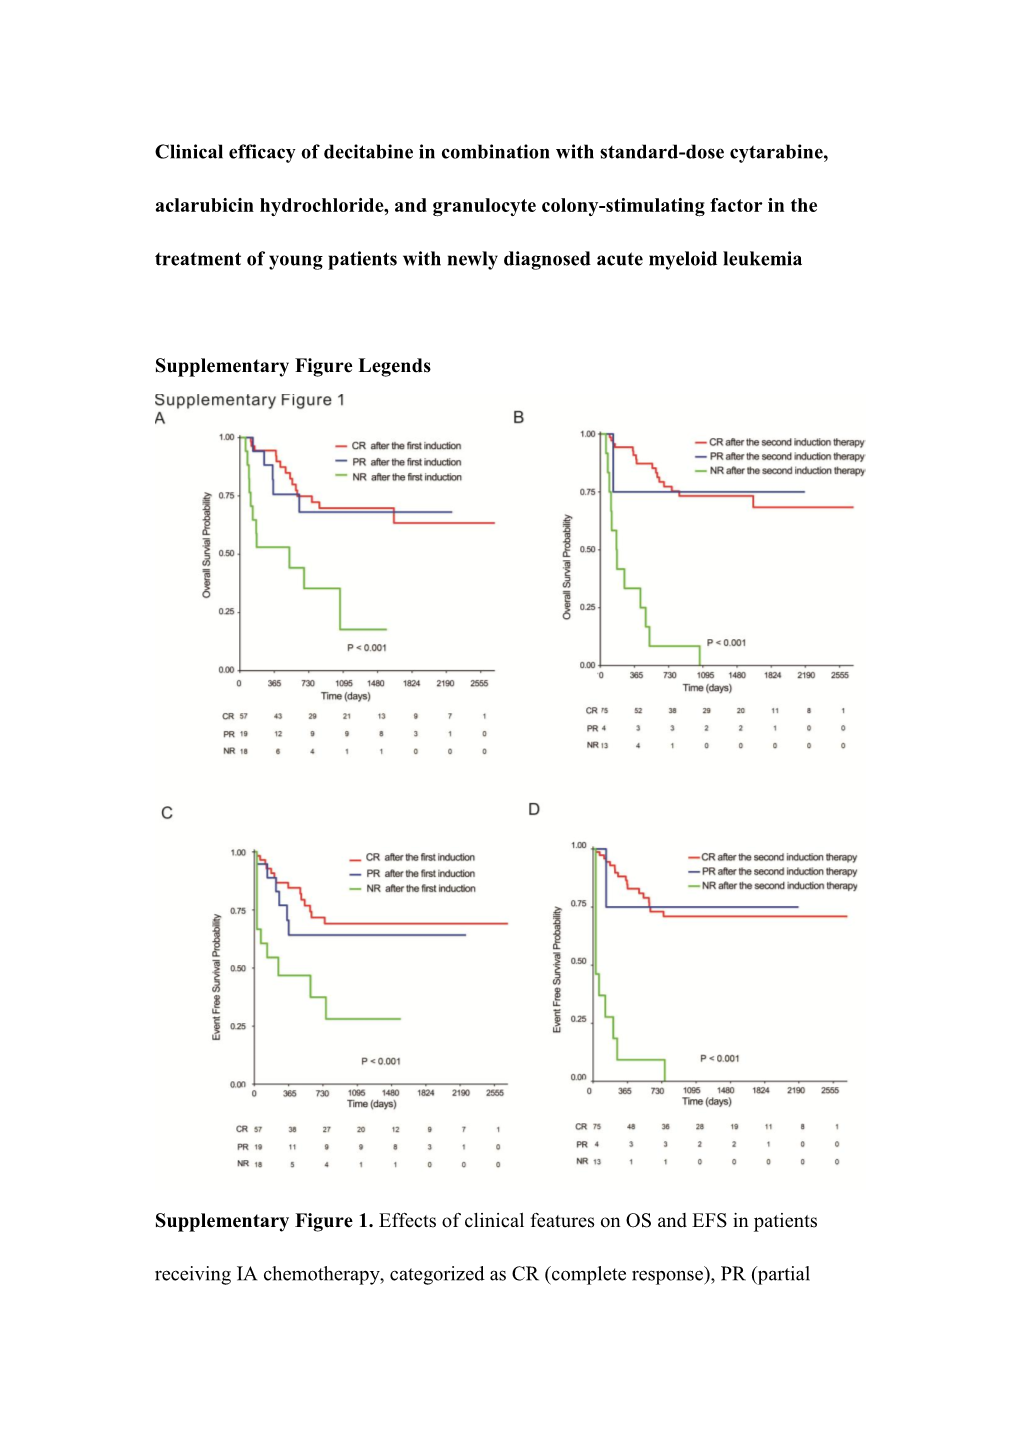 Clinical Efficacy of Decitabine in Combination with Standard-Dose